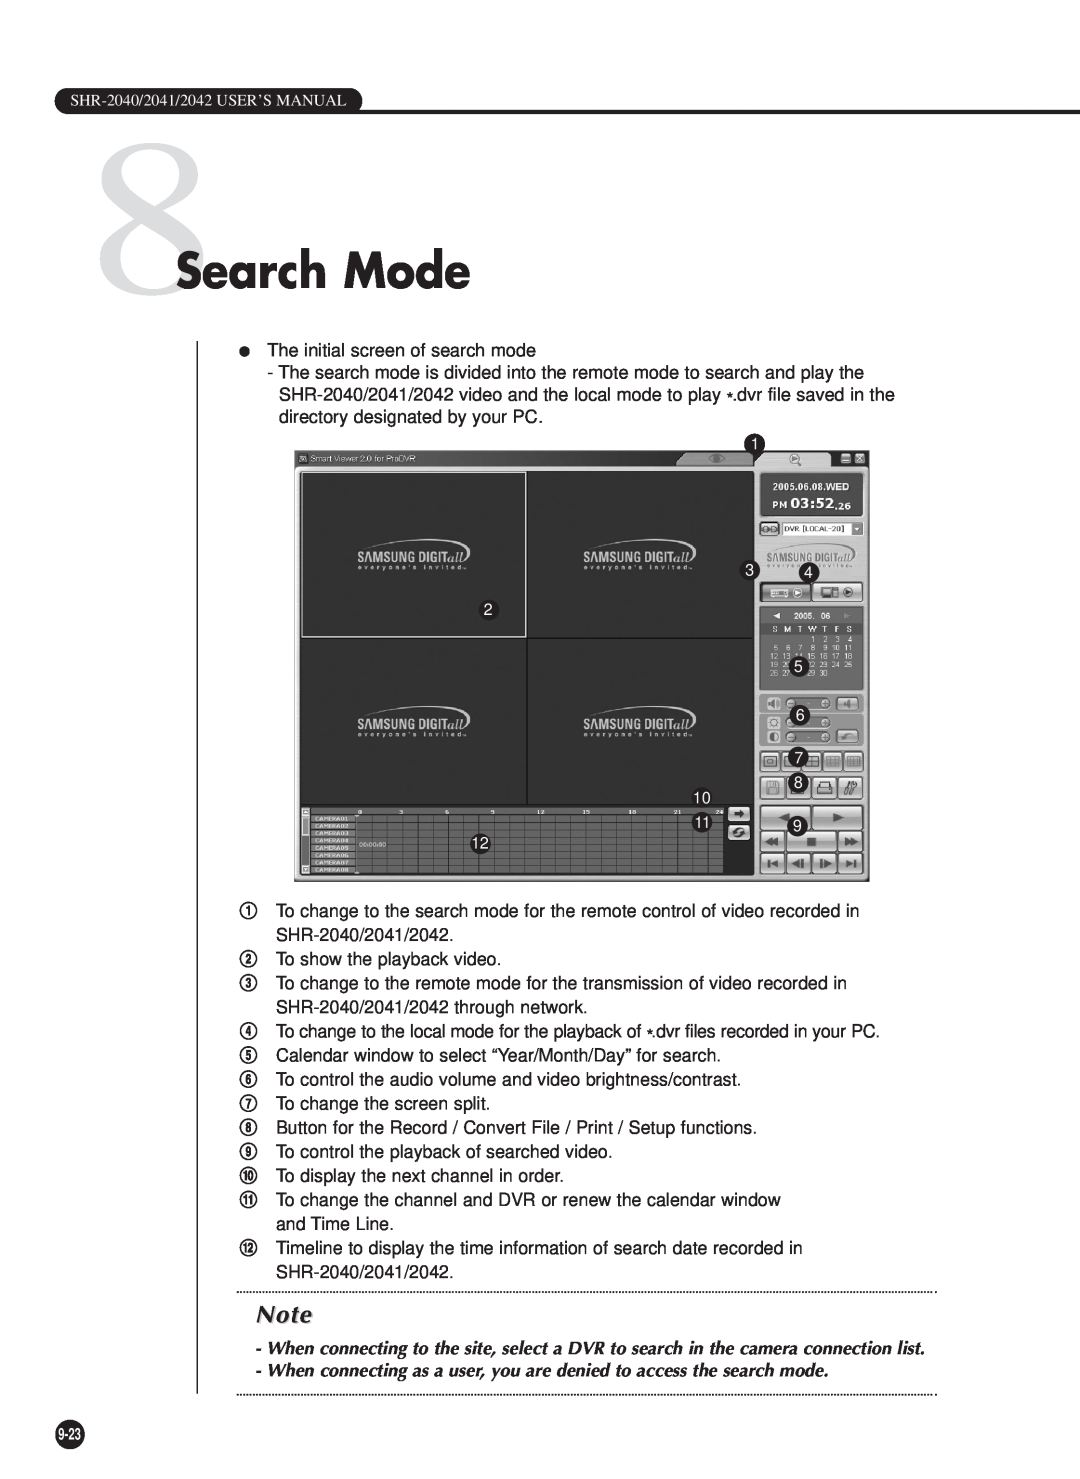 Samsung SHR-2042P, SHR-2040PX manual 8Search Mode, When connecting as a user, you are denied to access the search mode 